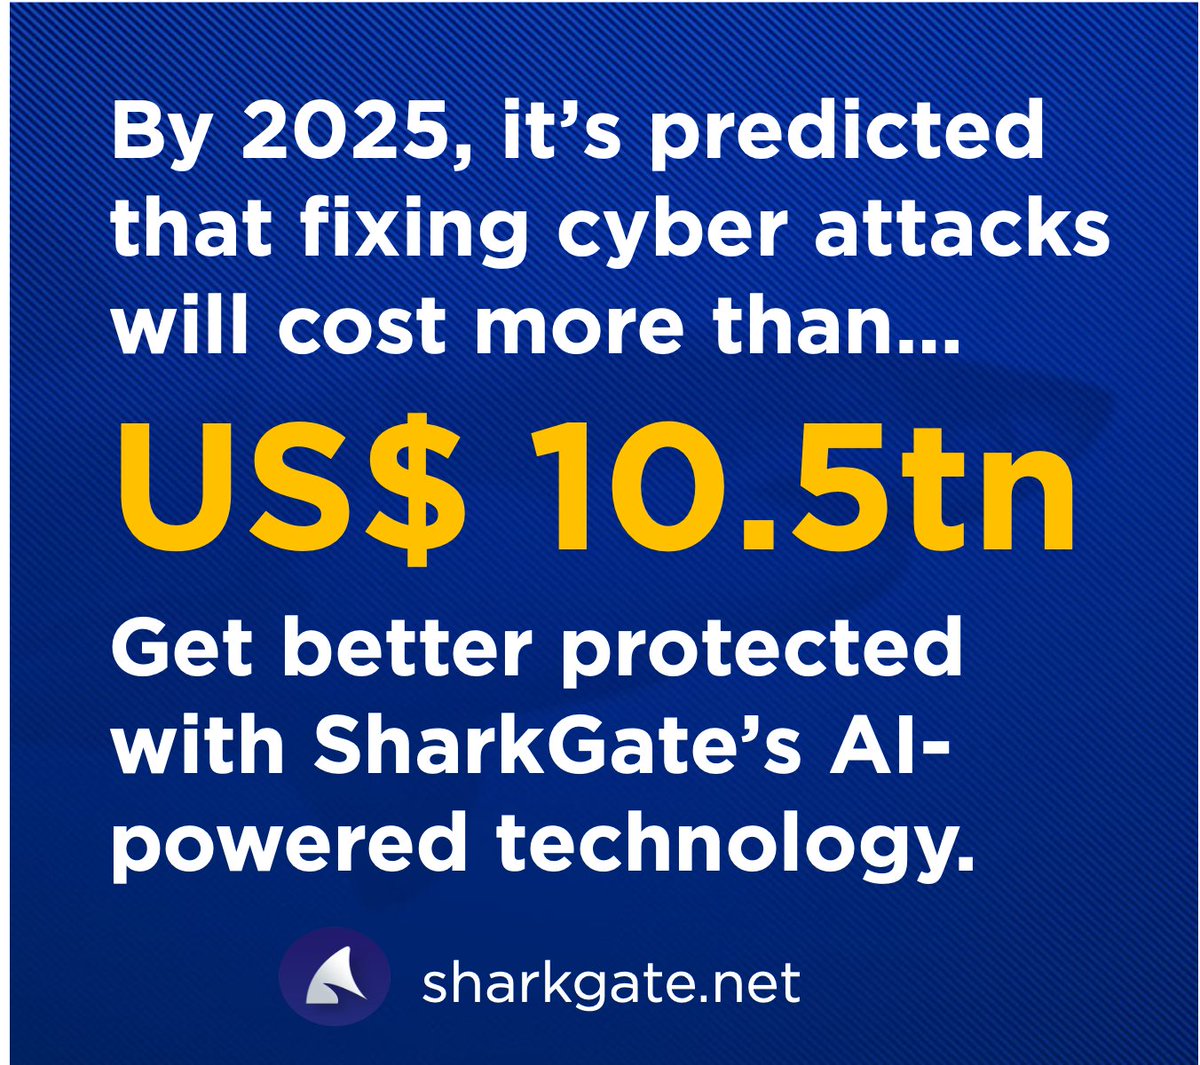 By 2025, it's predicted that the cost of fixing cyber attacks will cost over USD10.5tn. Our clients are protected by the latest AI & machine learning tech. Don't wait for the damage to be done, be better protected with @SharkGate #AIpoweredtech #fightback #wearesharkgate